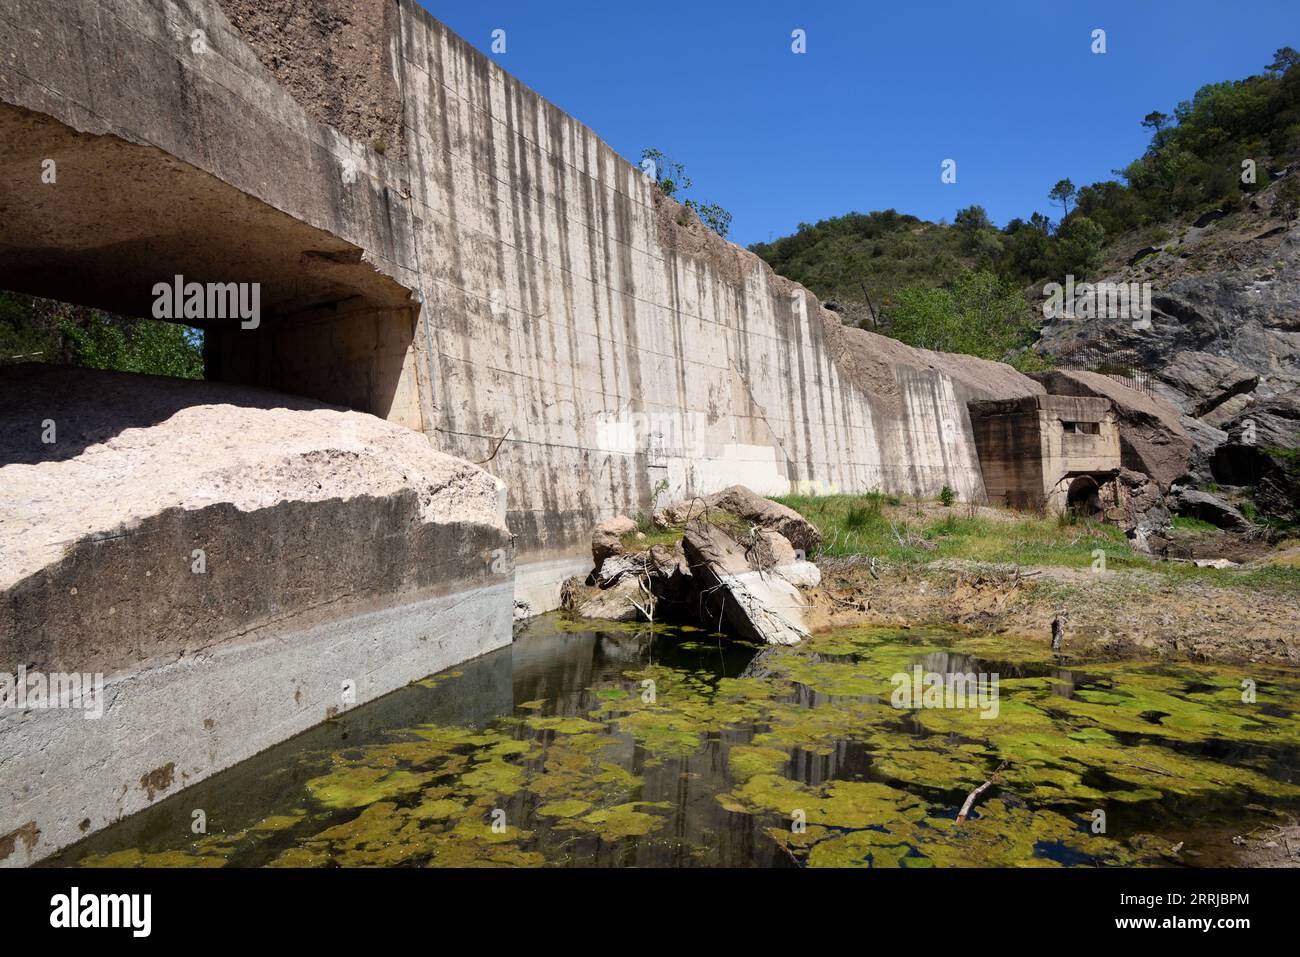 Ruined Barrage or Dam of Malpasset on River Reyran which Collapsed in the Dam Disaster of 1959 Killing 423 People Frejus Var Provence France Stock Photo